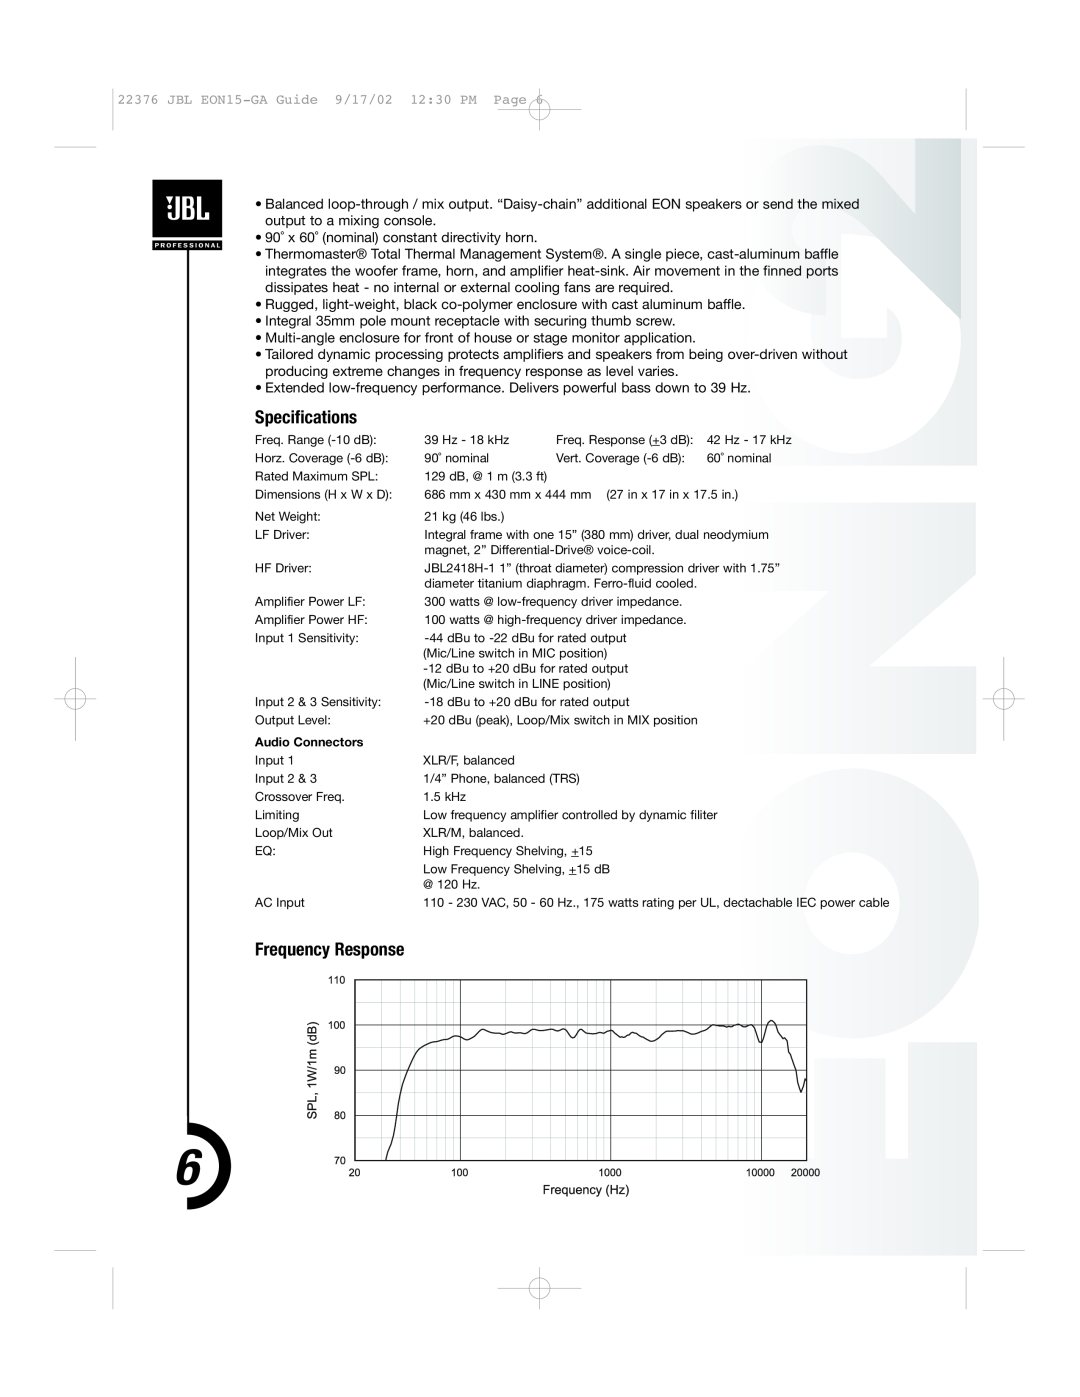 JBL manual Specifications, Frequency Response, JBL EON15-GAGuide 9/17/02 12 30 PM Page 